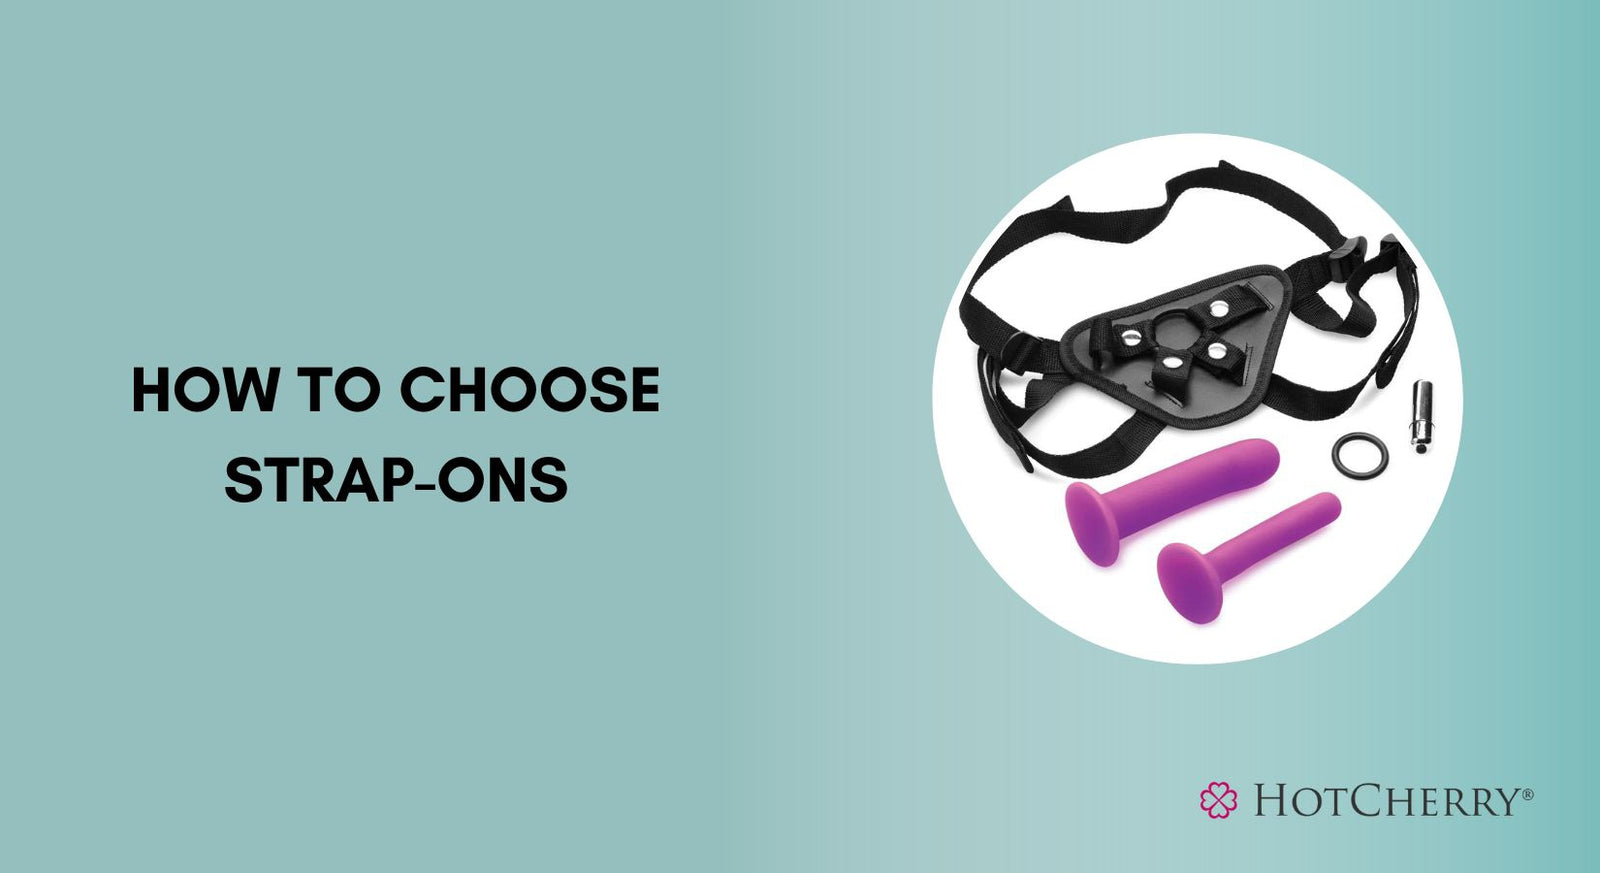 How to Choose a Strap-On: Guide for Getting a Great Strap-On